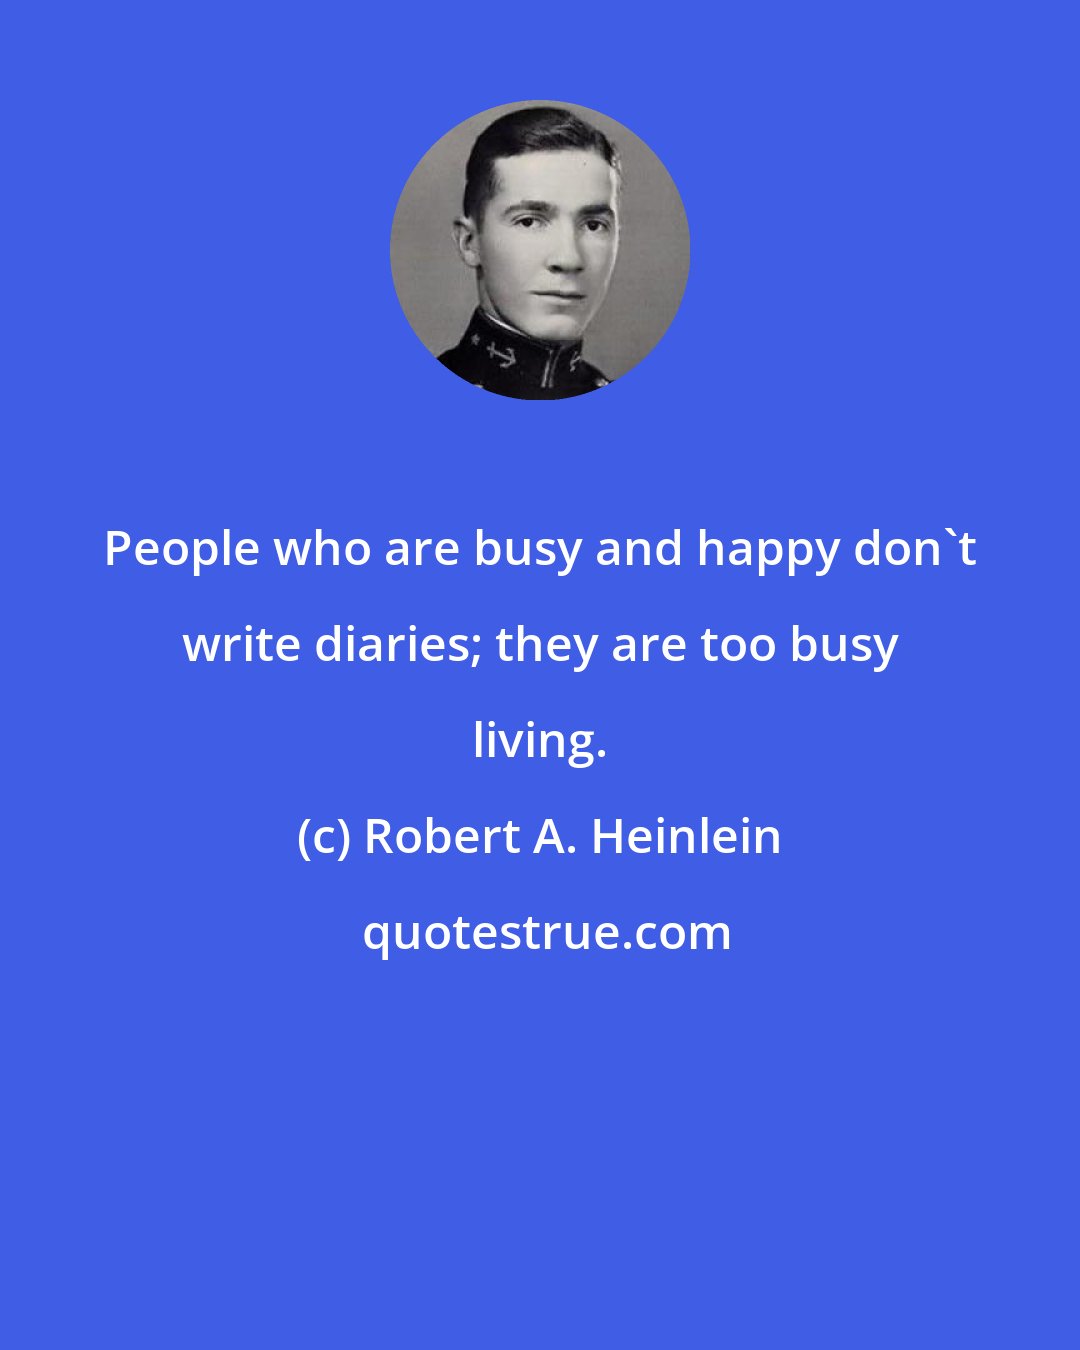 Robert A. Heinlein: People who are busy and happy don't write diaries; they are too busy living.